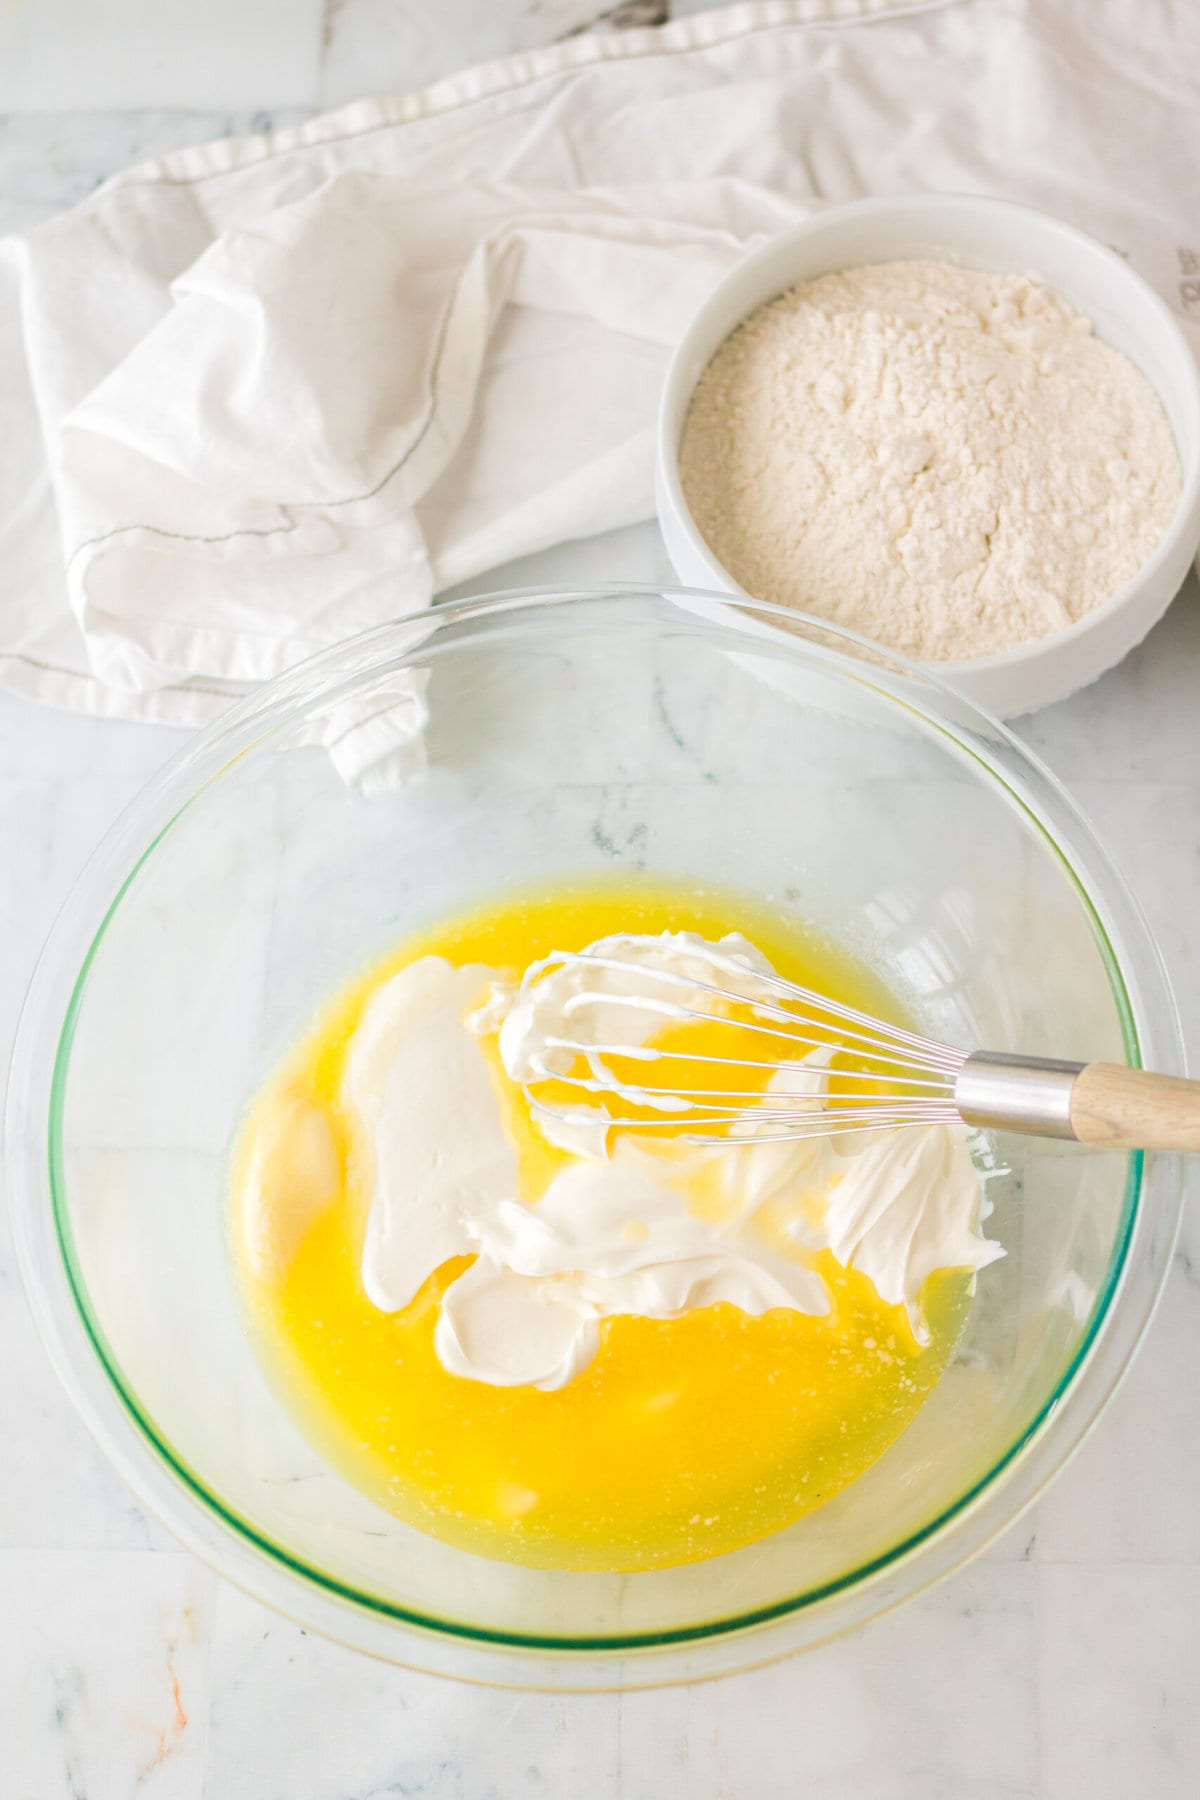 Mixing the butter and sour cream.